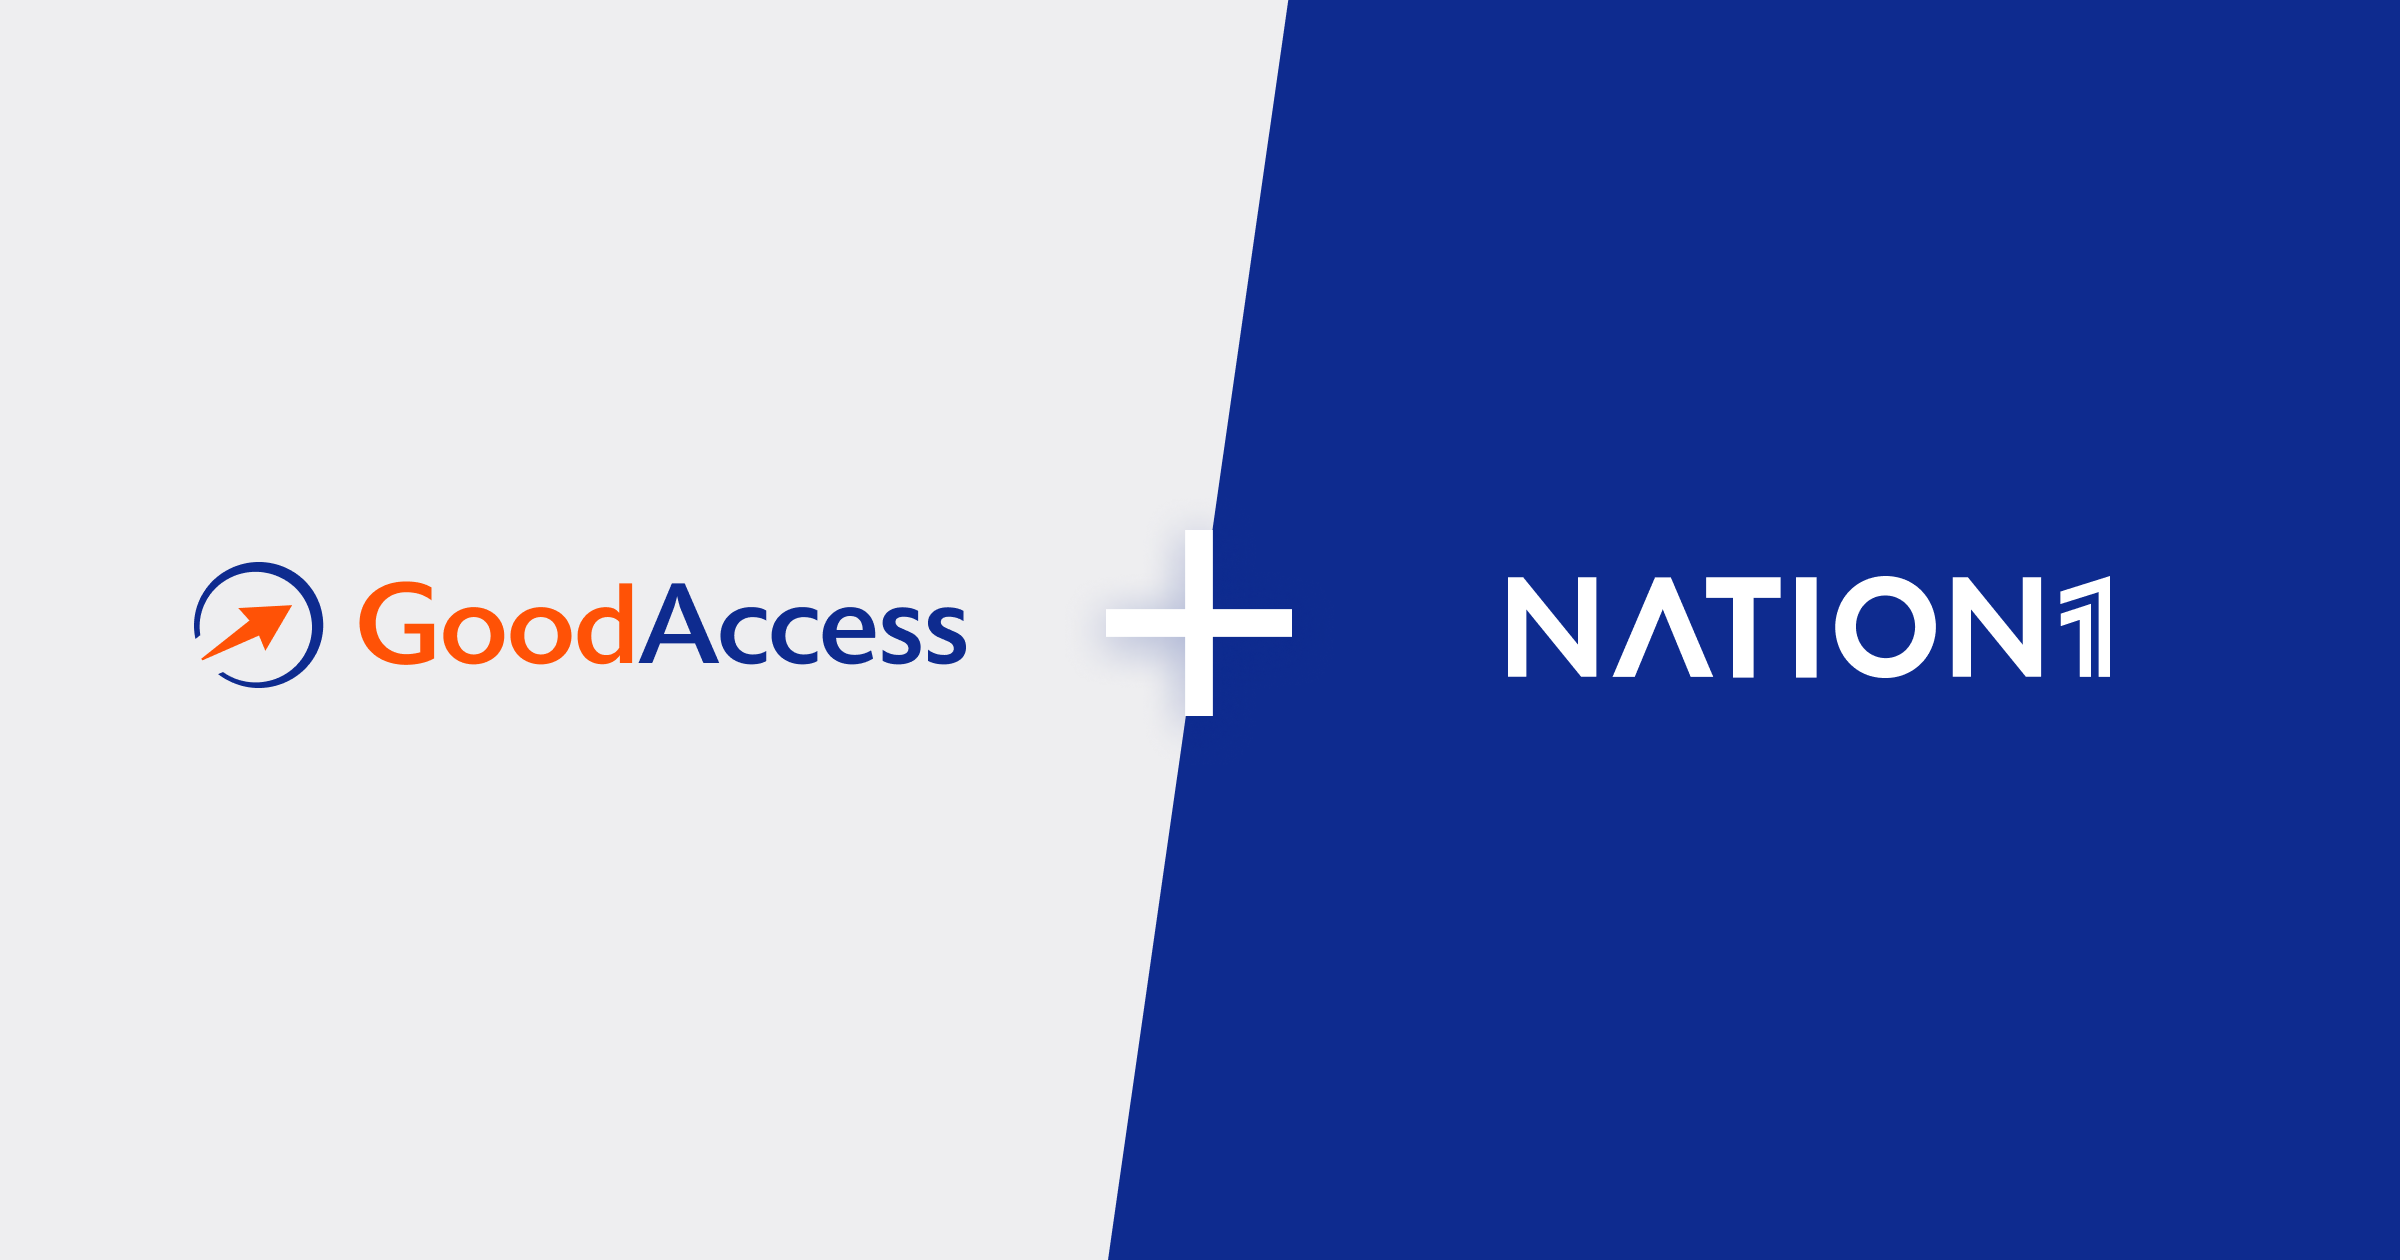 GoodAccess Nation 1 Investment